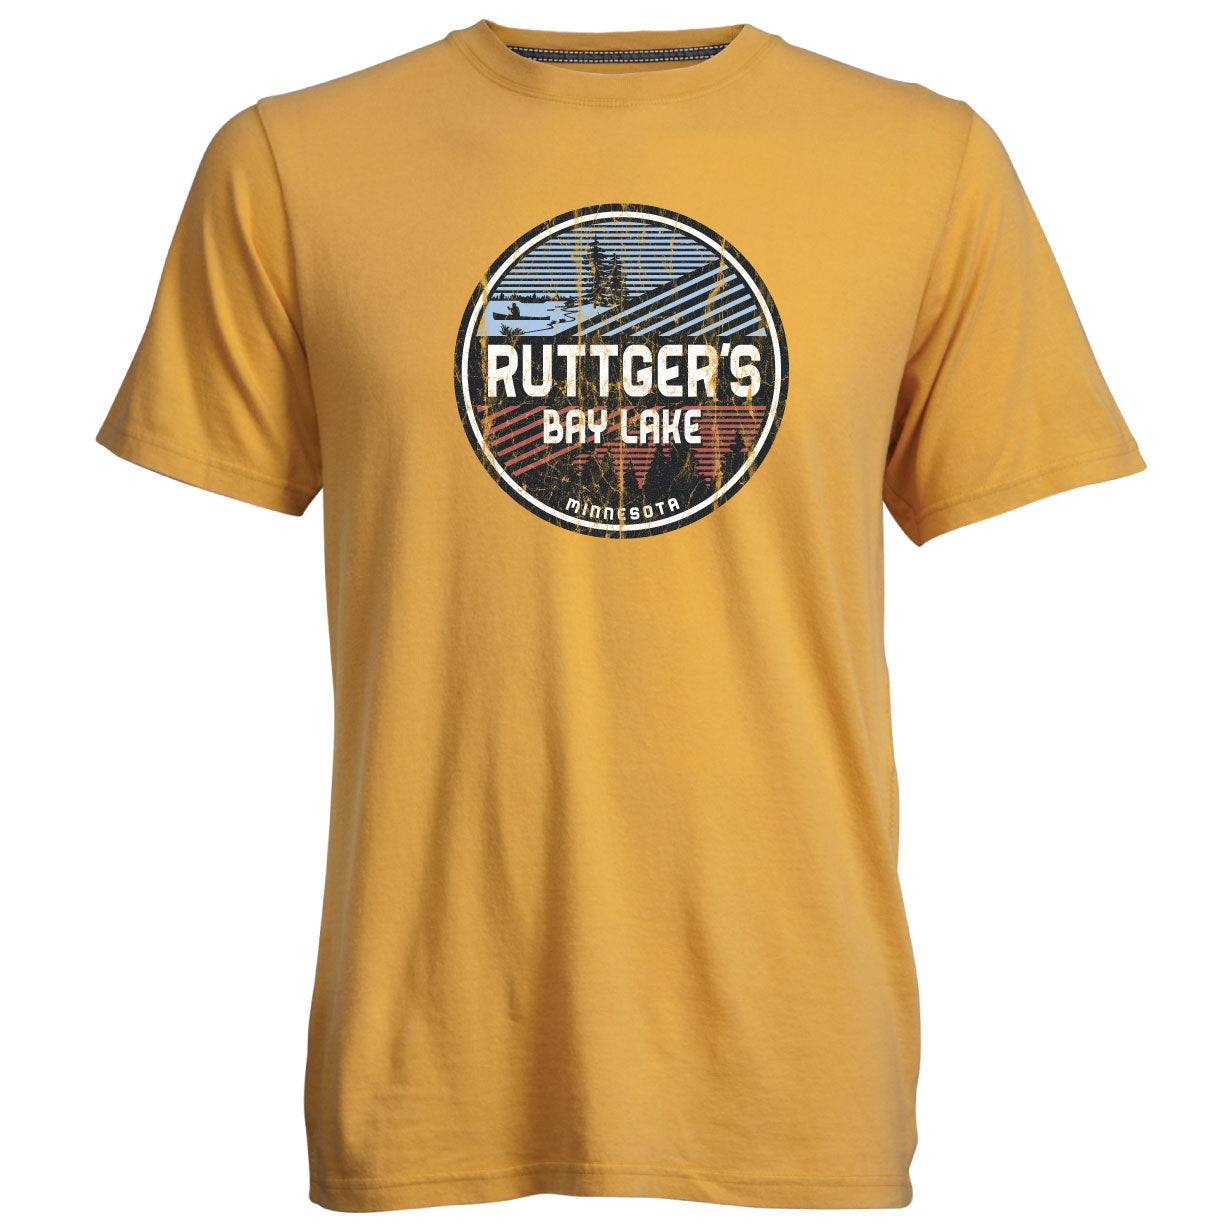 Ruttger's Go To Tee - Bluejay or Faded Gold